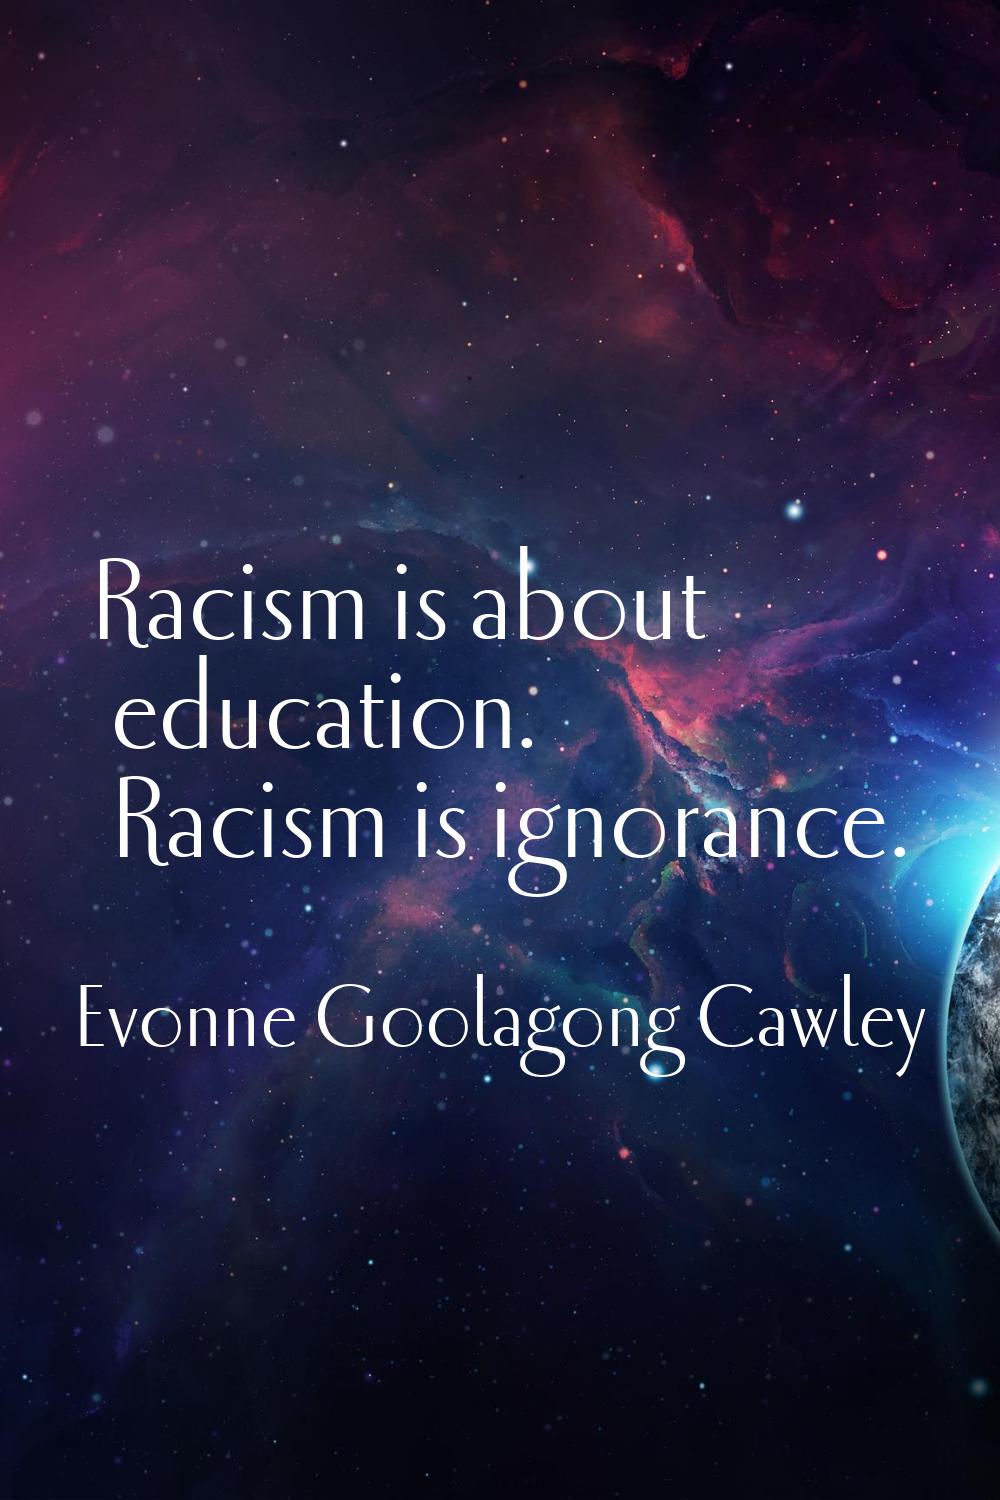 Racism is about education. Racism is ignorance.